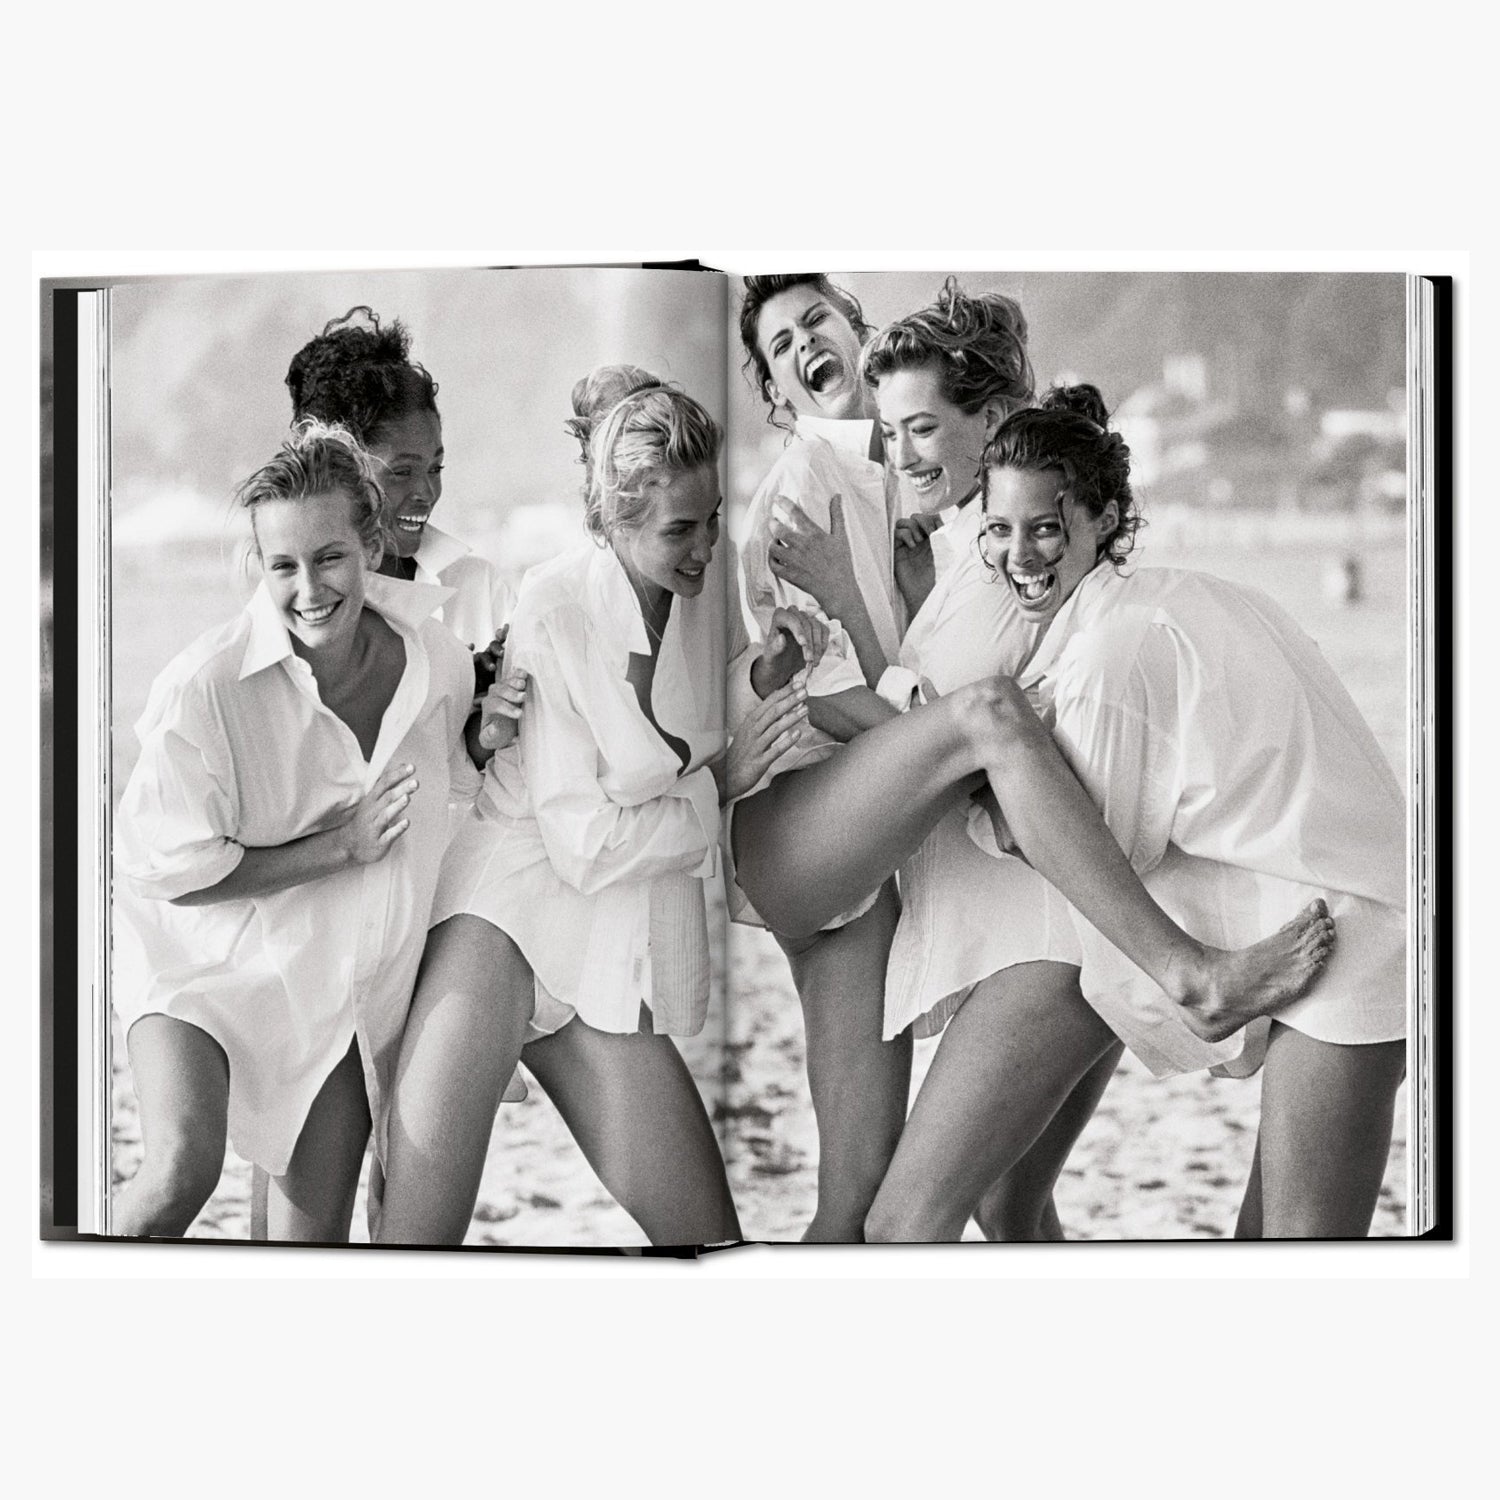 Peter Lindbergh’s seminal compendium, now published in a special 40th anniversary edition from TASCHEN. 